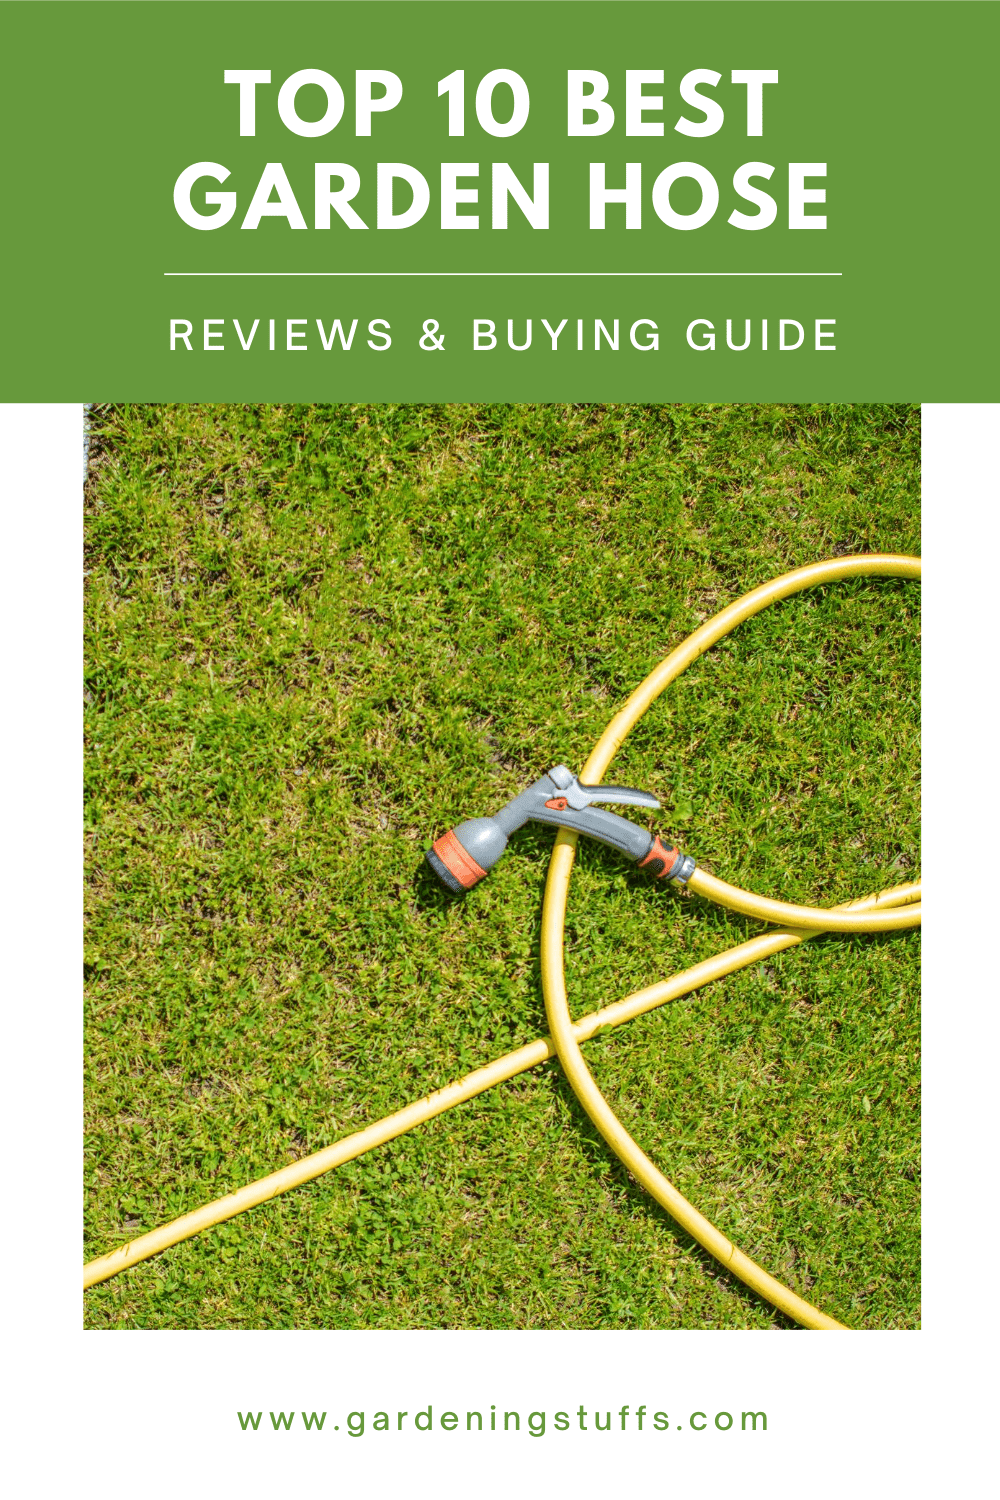 Garden hose is a flexible tube used to transfer water from an outdoor spigot or faucet to another location. It is a very versatile tool for maintaining the garden. We’ve assessed the best rubber garden hose and buying guide that offers value for money. Learn more about gardening tips @ #GardeningStuffs